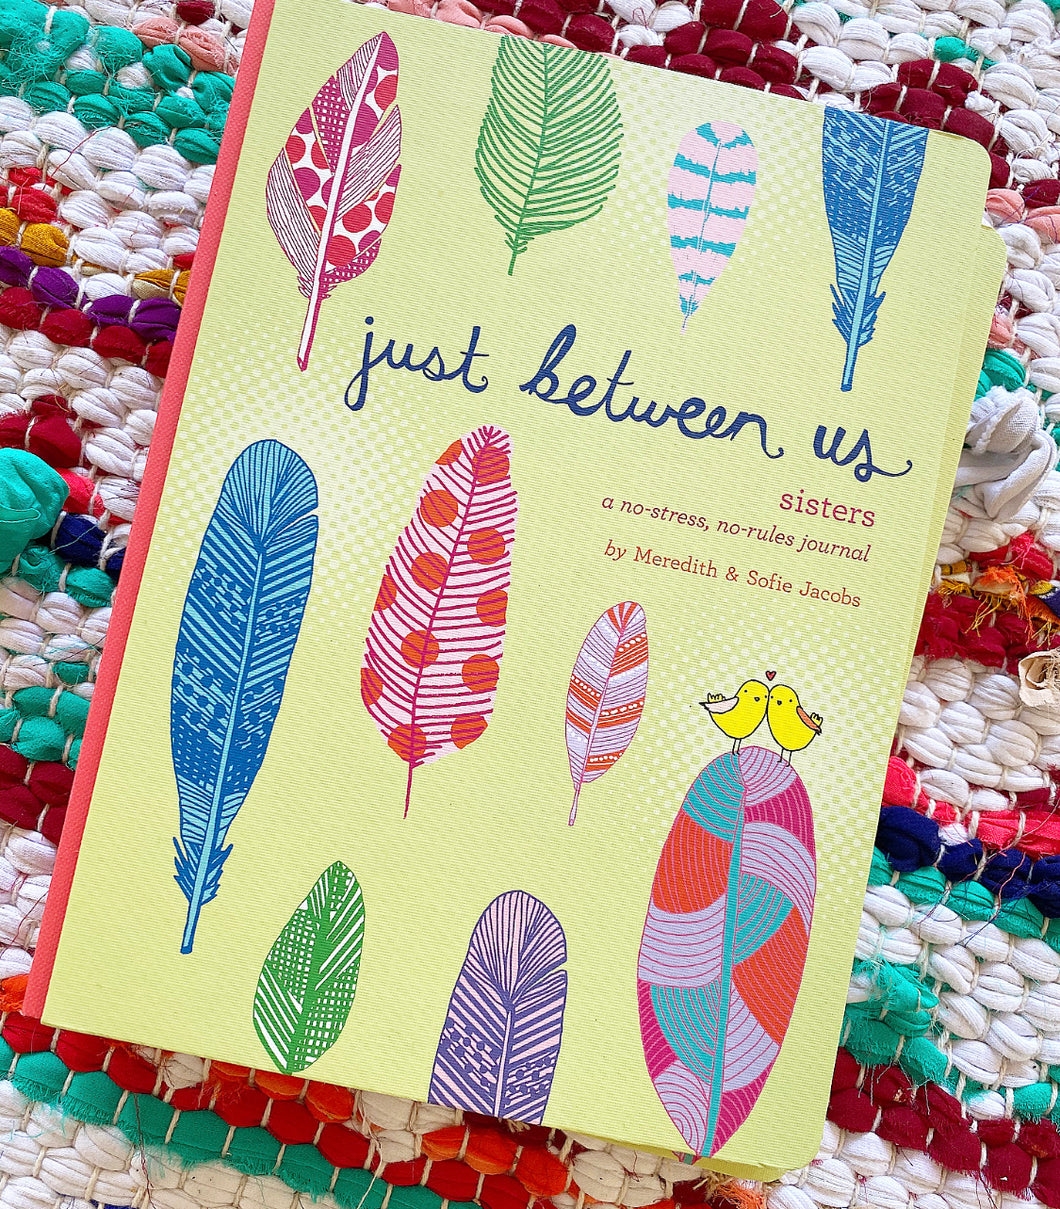 Just Between Us: Sisters A No-Stress, No-Rules Journal